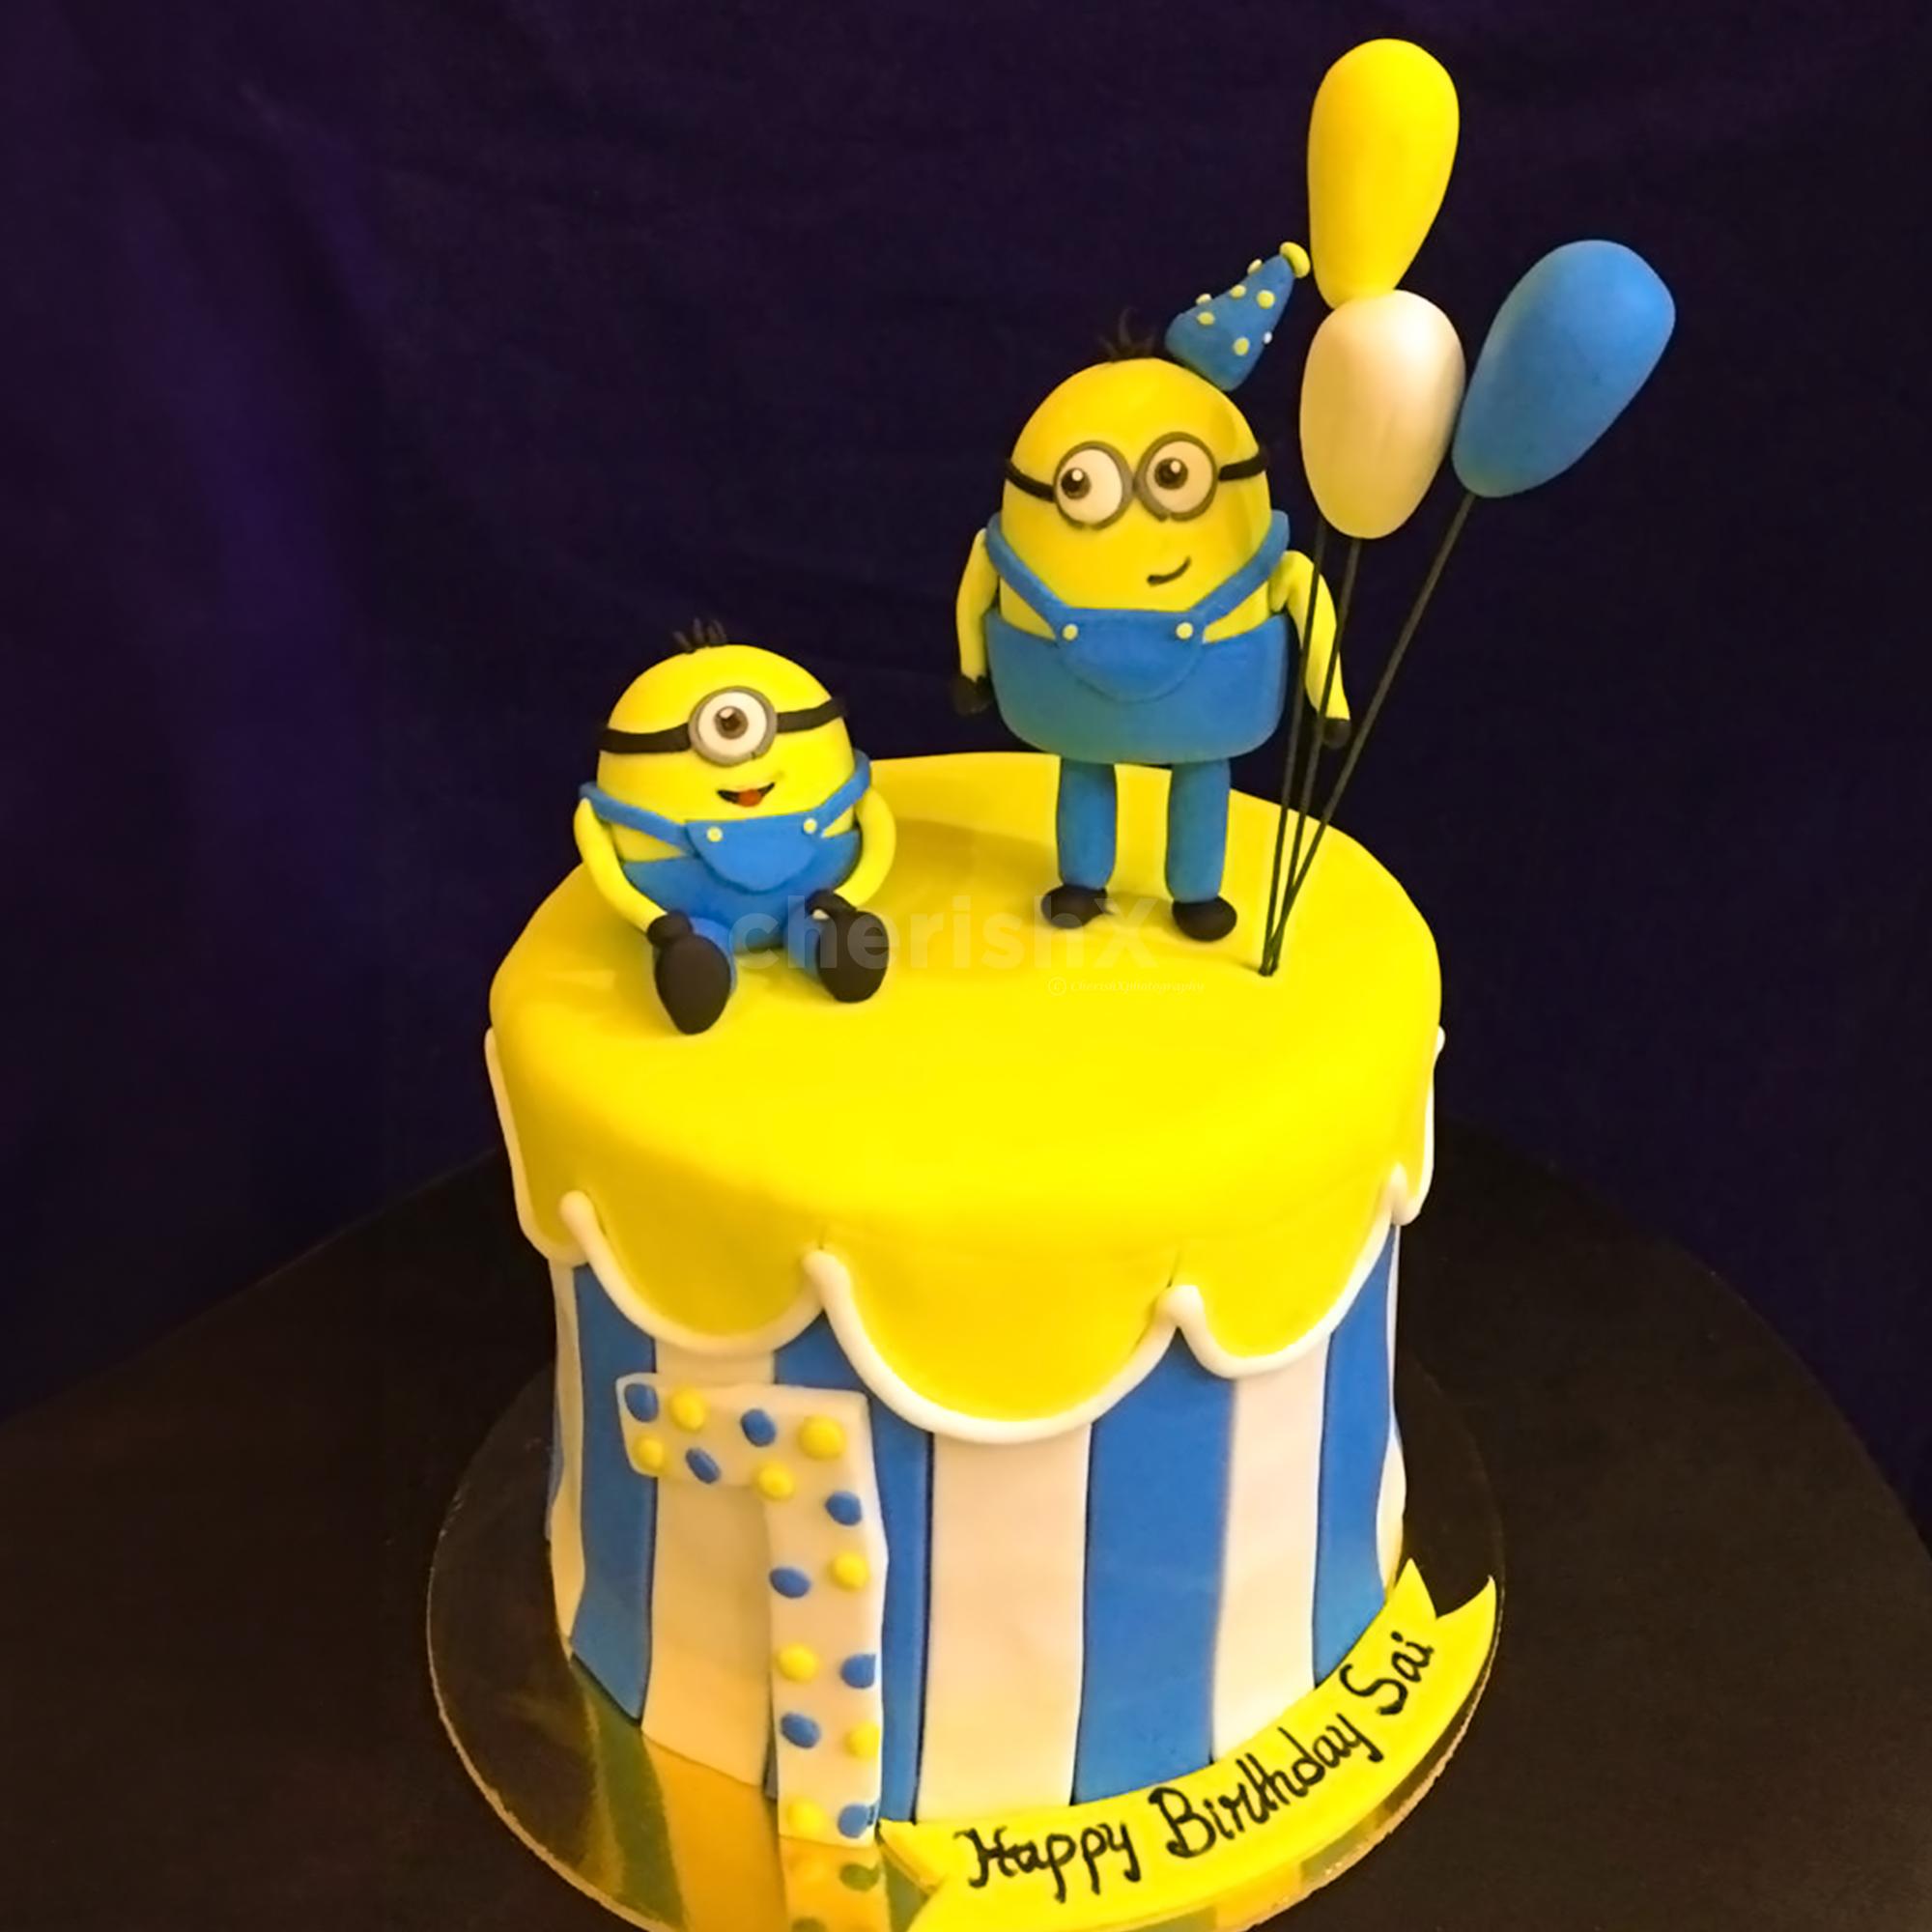 Despicable Me Minion Inspired Cake